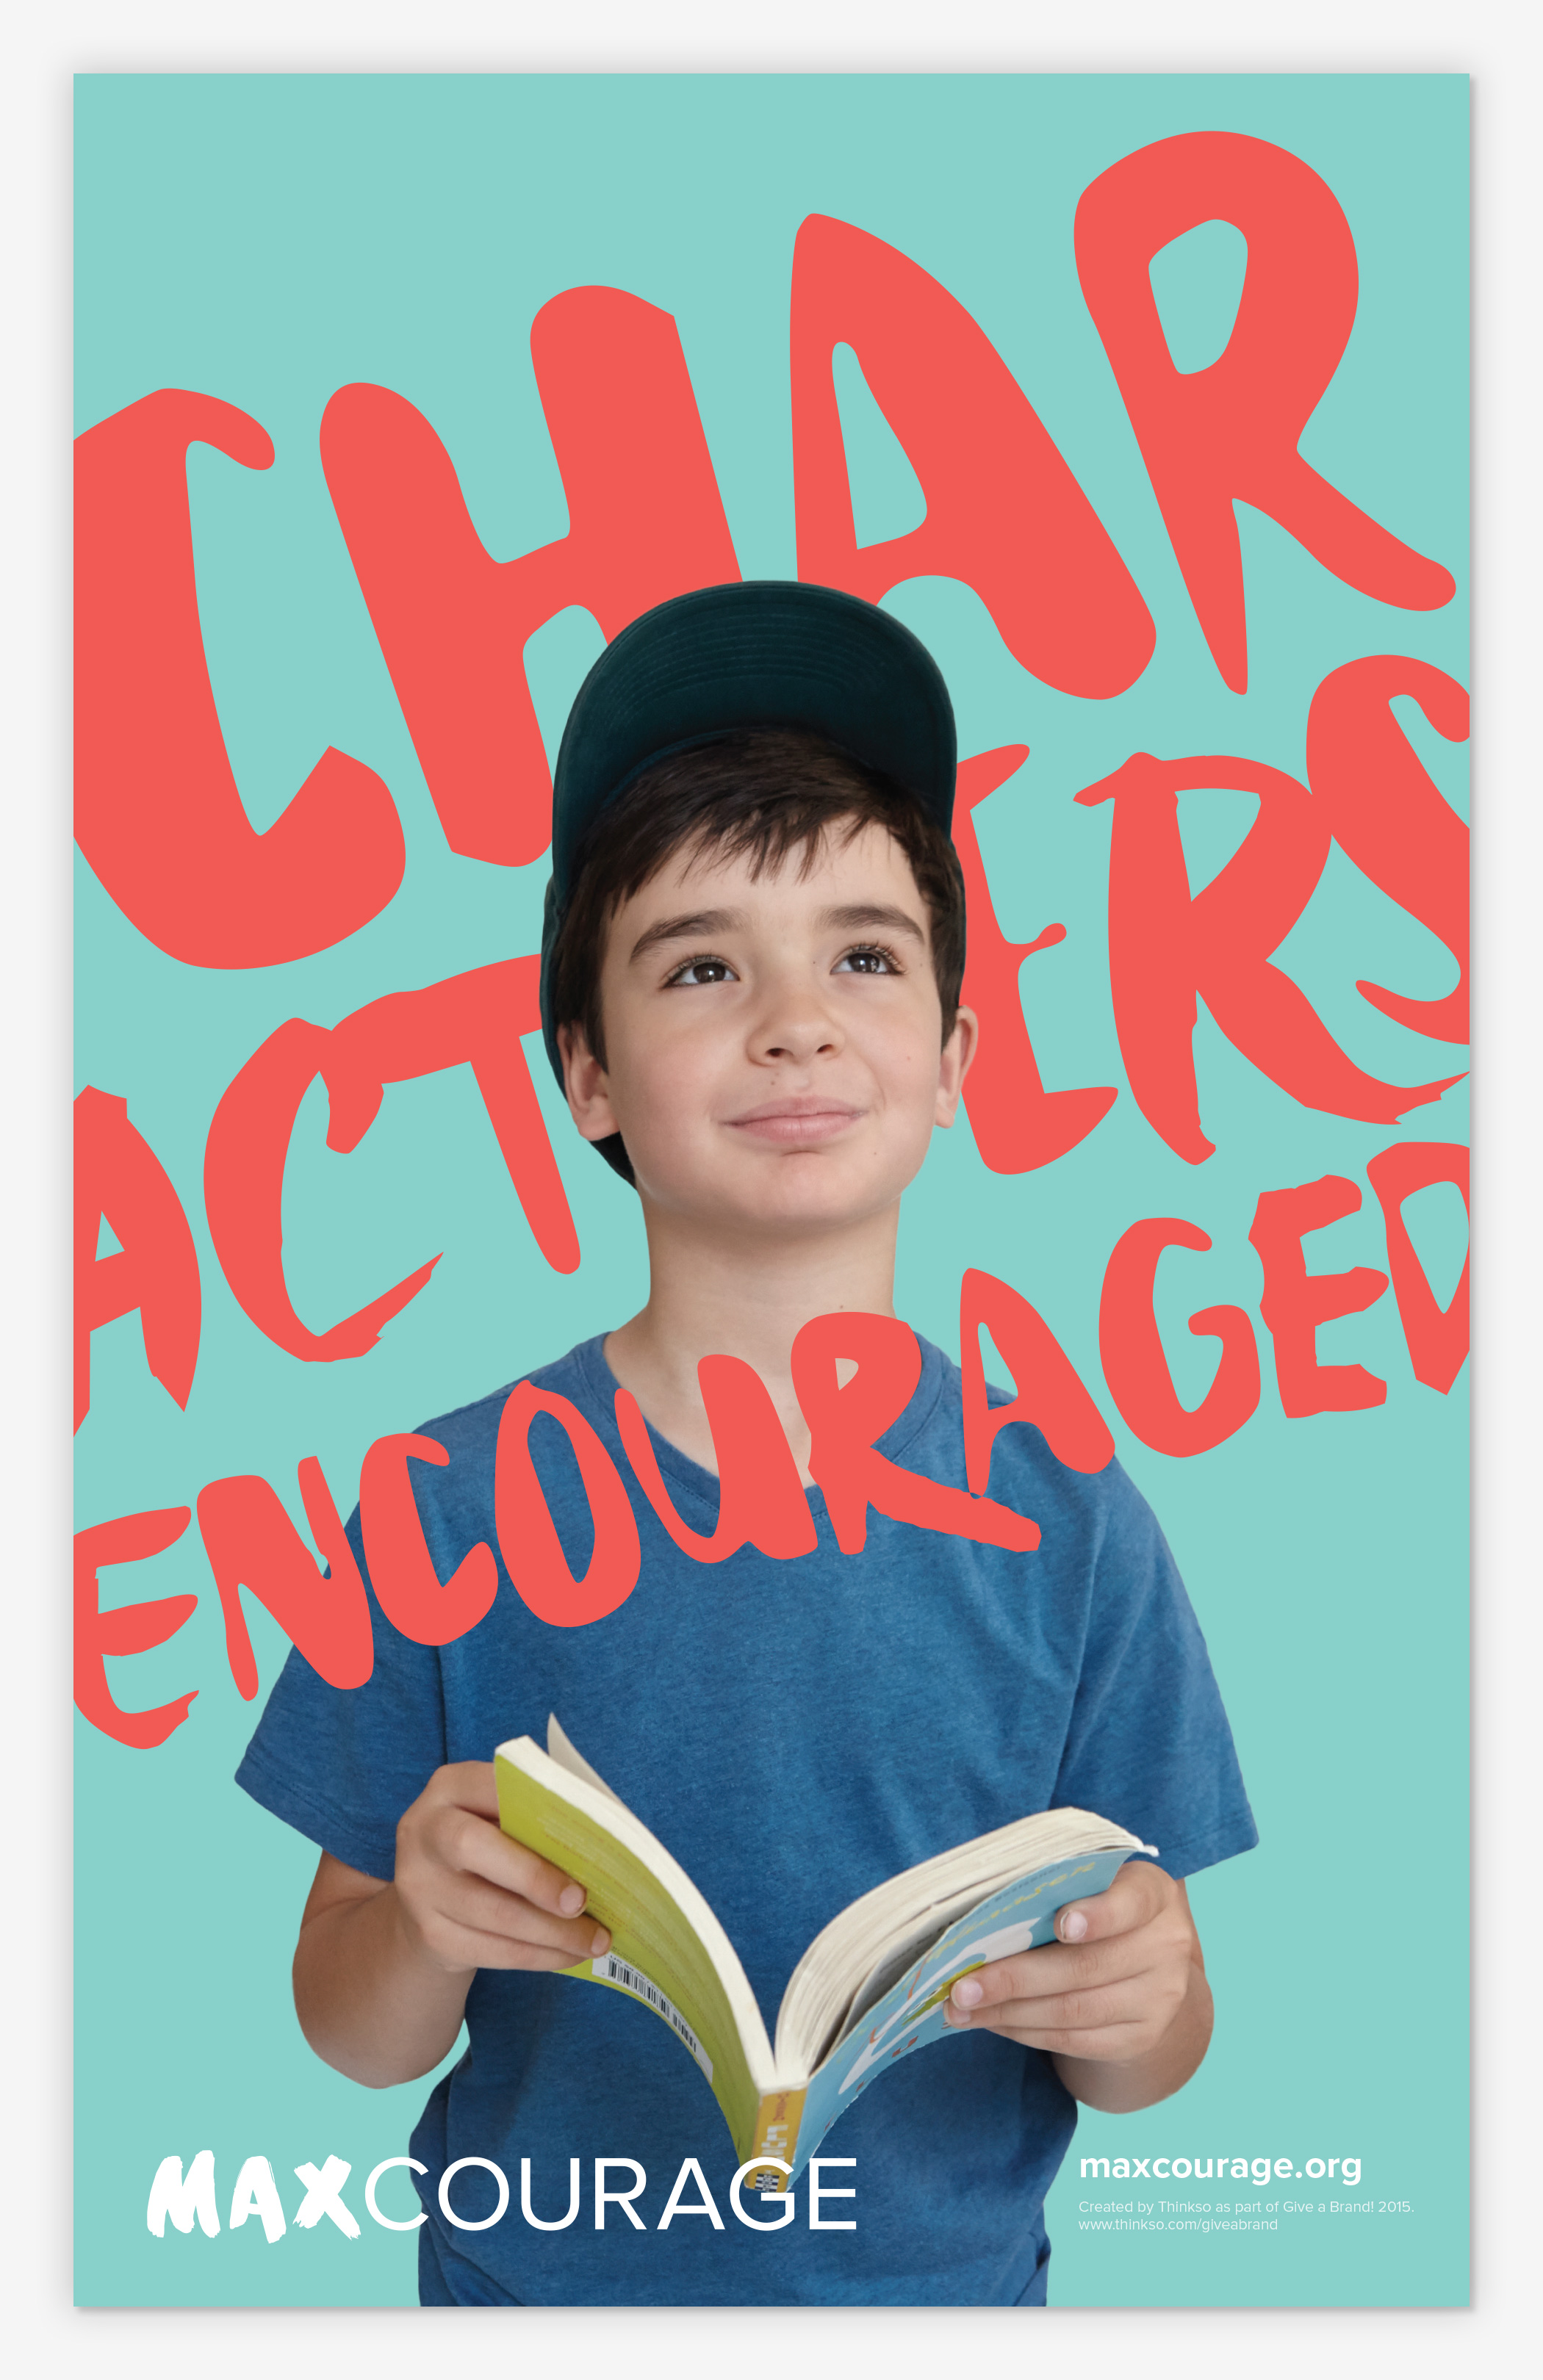 A Max Courage brochure cover shows a boy in a ball cap holding an open book and the text, "Characters encouraged."